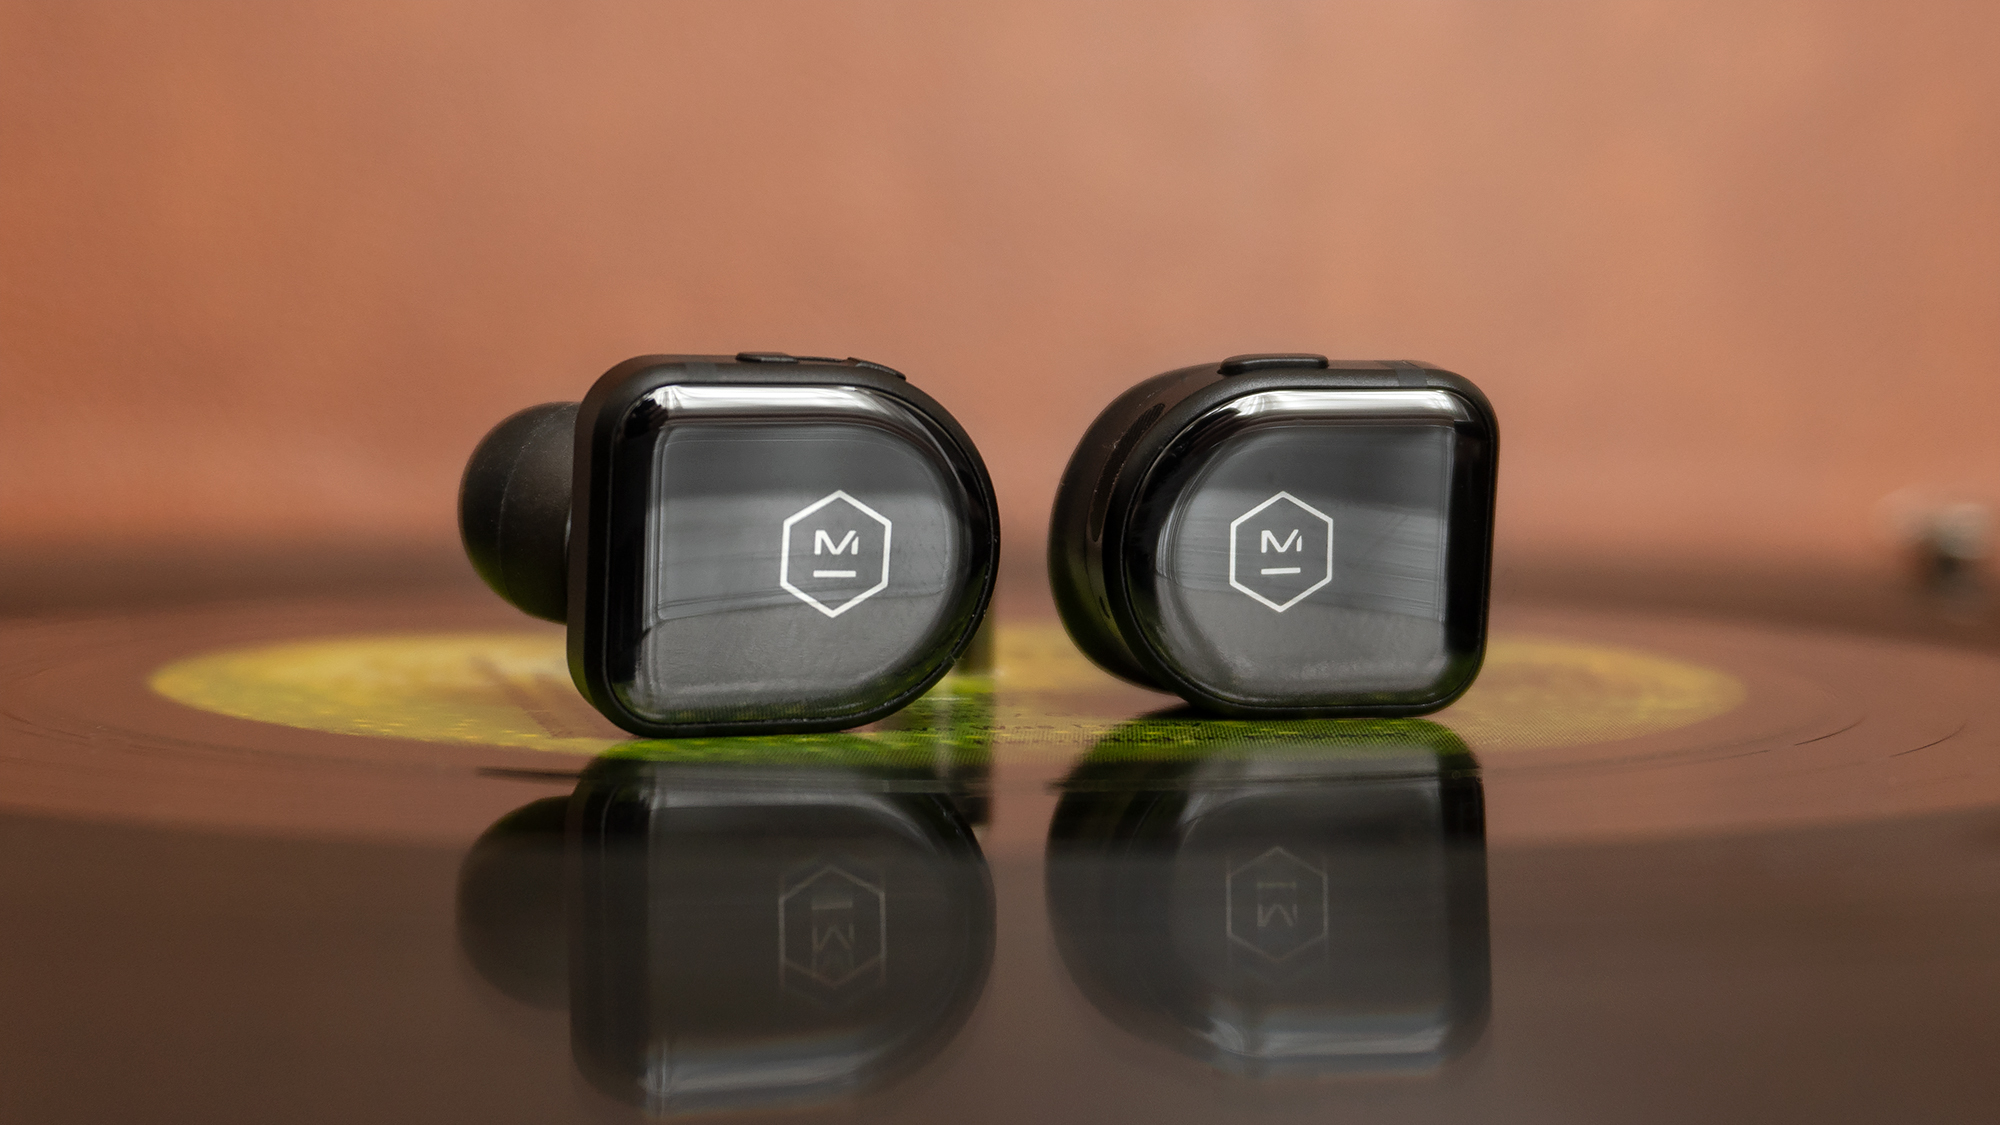 Instead of tap controls which can often dislodge earbuds, the MW08s feature physical buttons for quick access to commonly used controls. (Photo: Andrew Liszewski/Gizmodo)